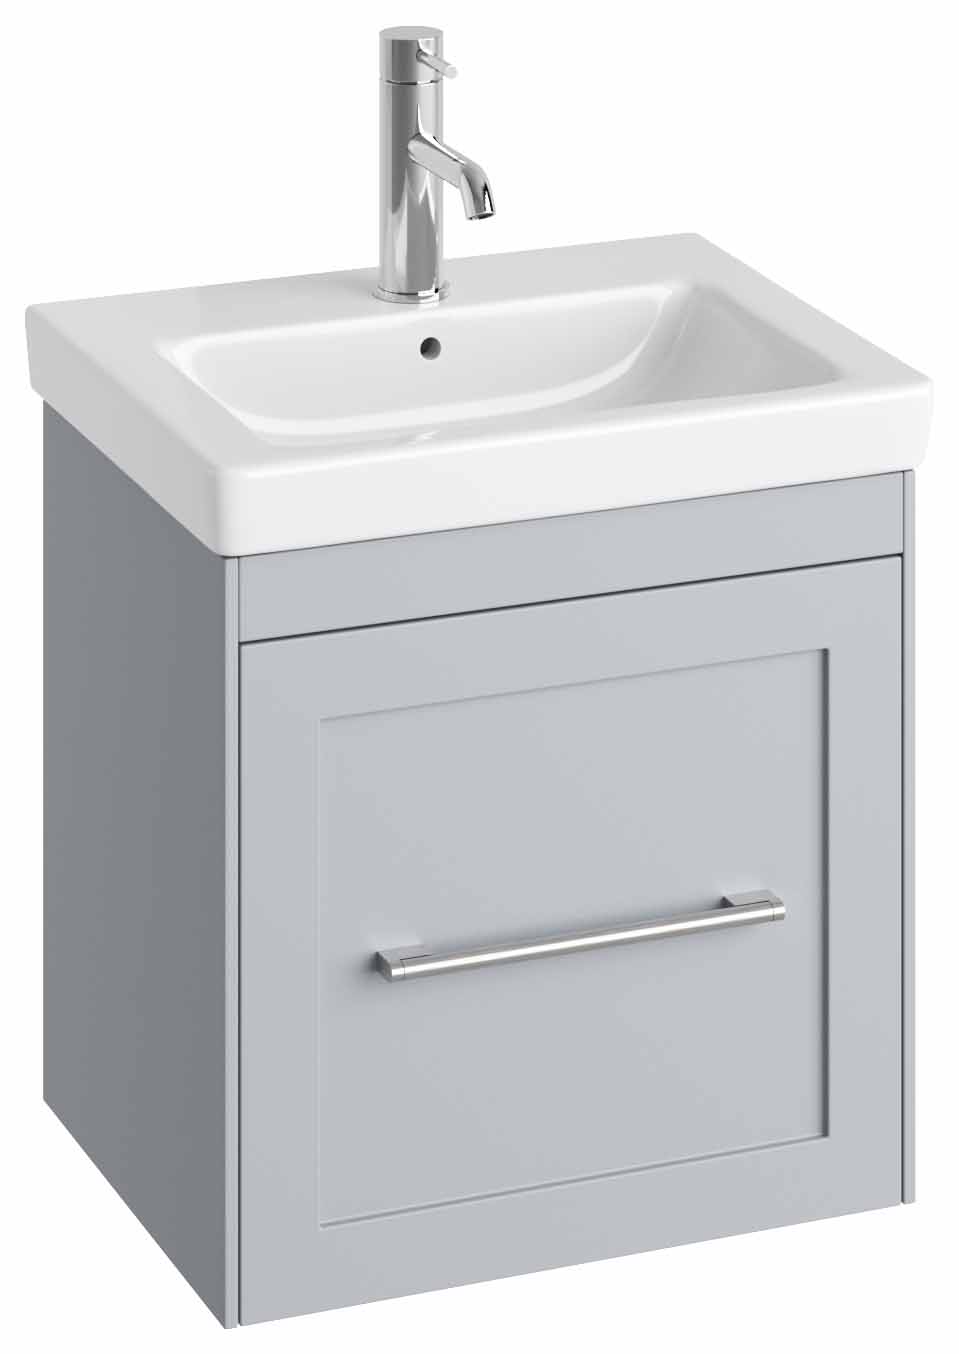 Image of Abacus Concept Stone Grey Shaker Wall Hung Vanity Unit & Basin - 450mm